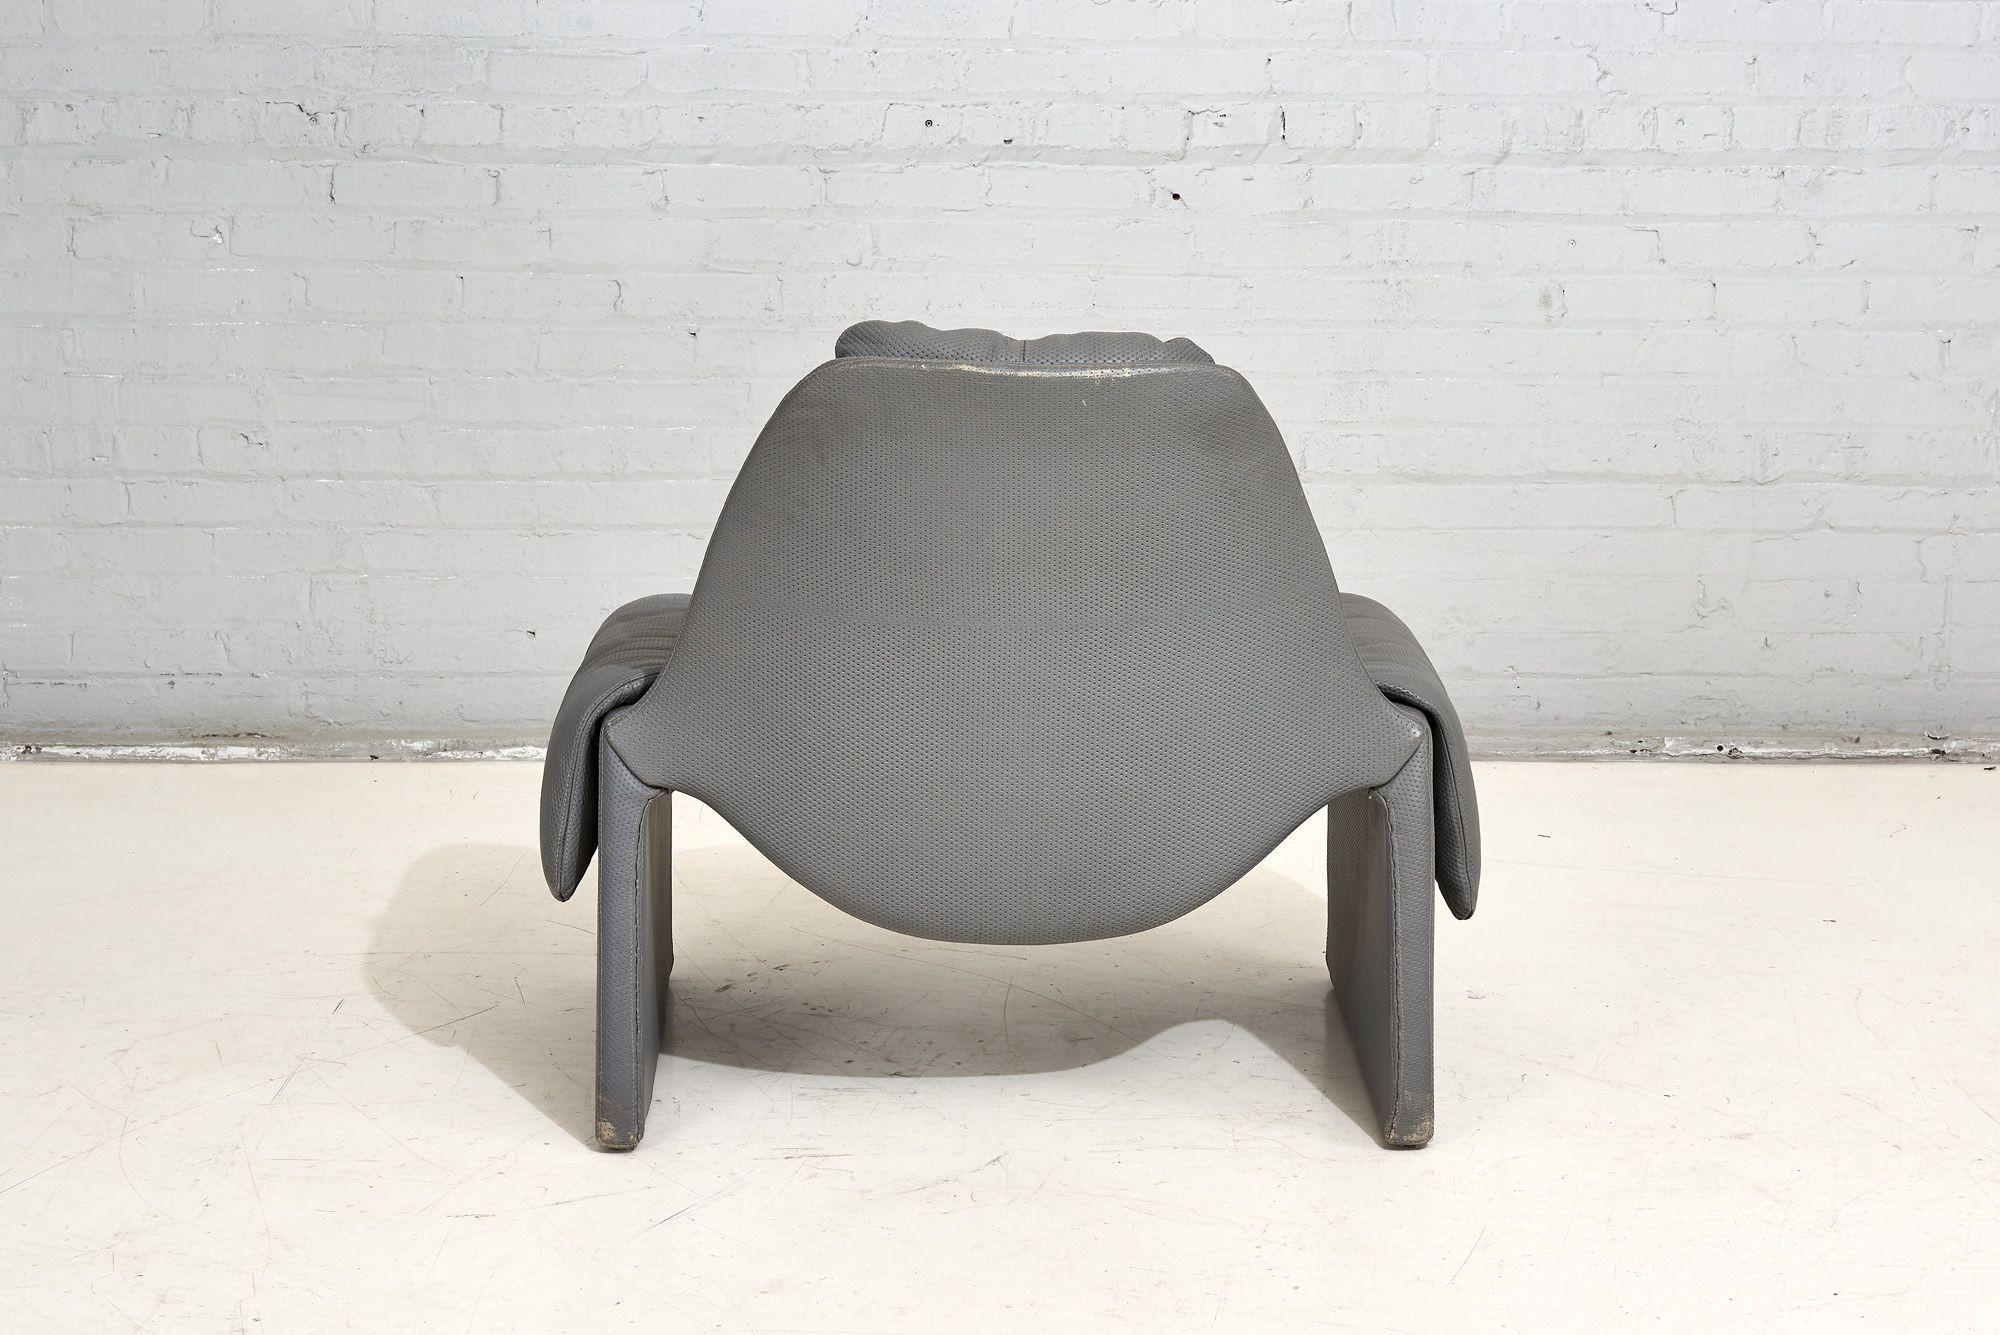 Leather Saporiti Italia Vittorio Introini P60 Lounge Chair by Proposals, Italy, 1970 For Sale